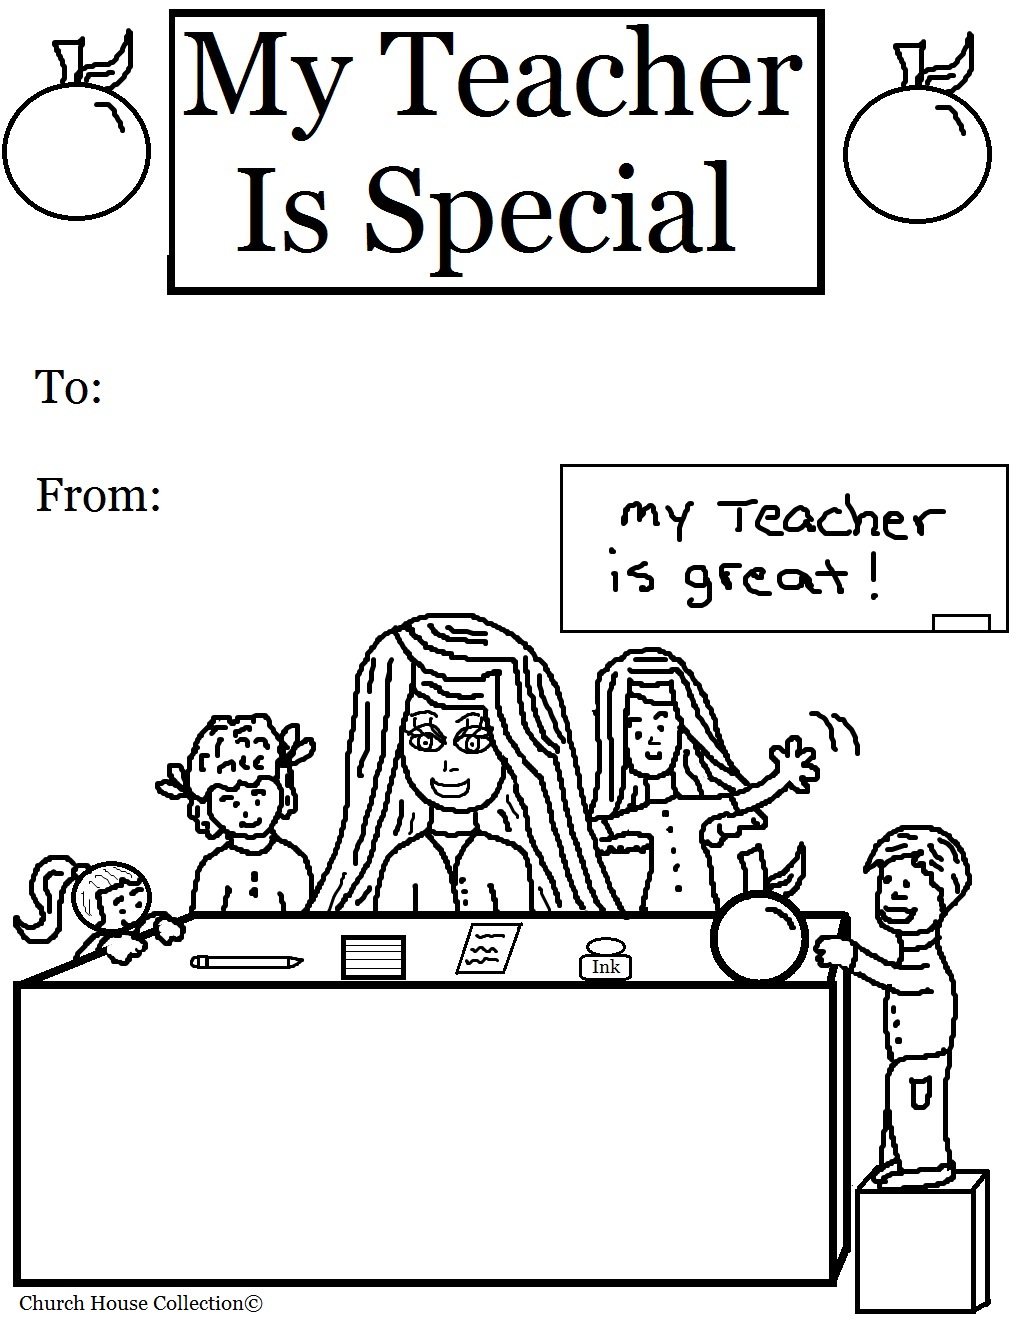  School House coloring pages, Coloring for kids, My teacher is special